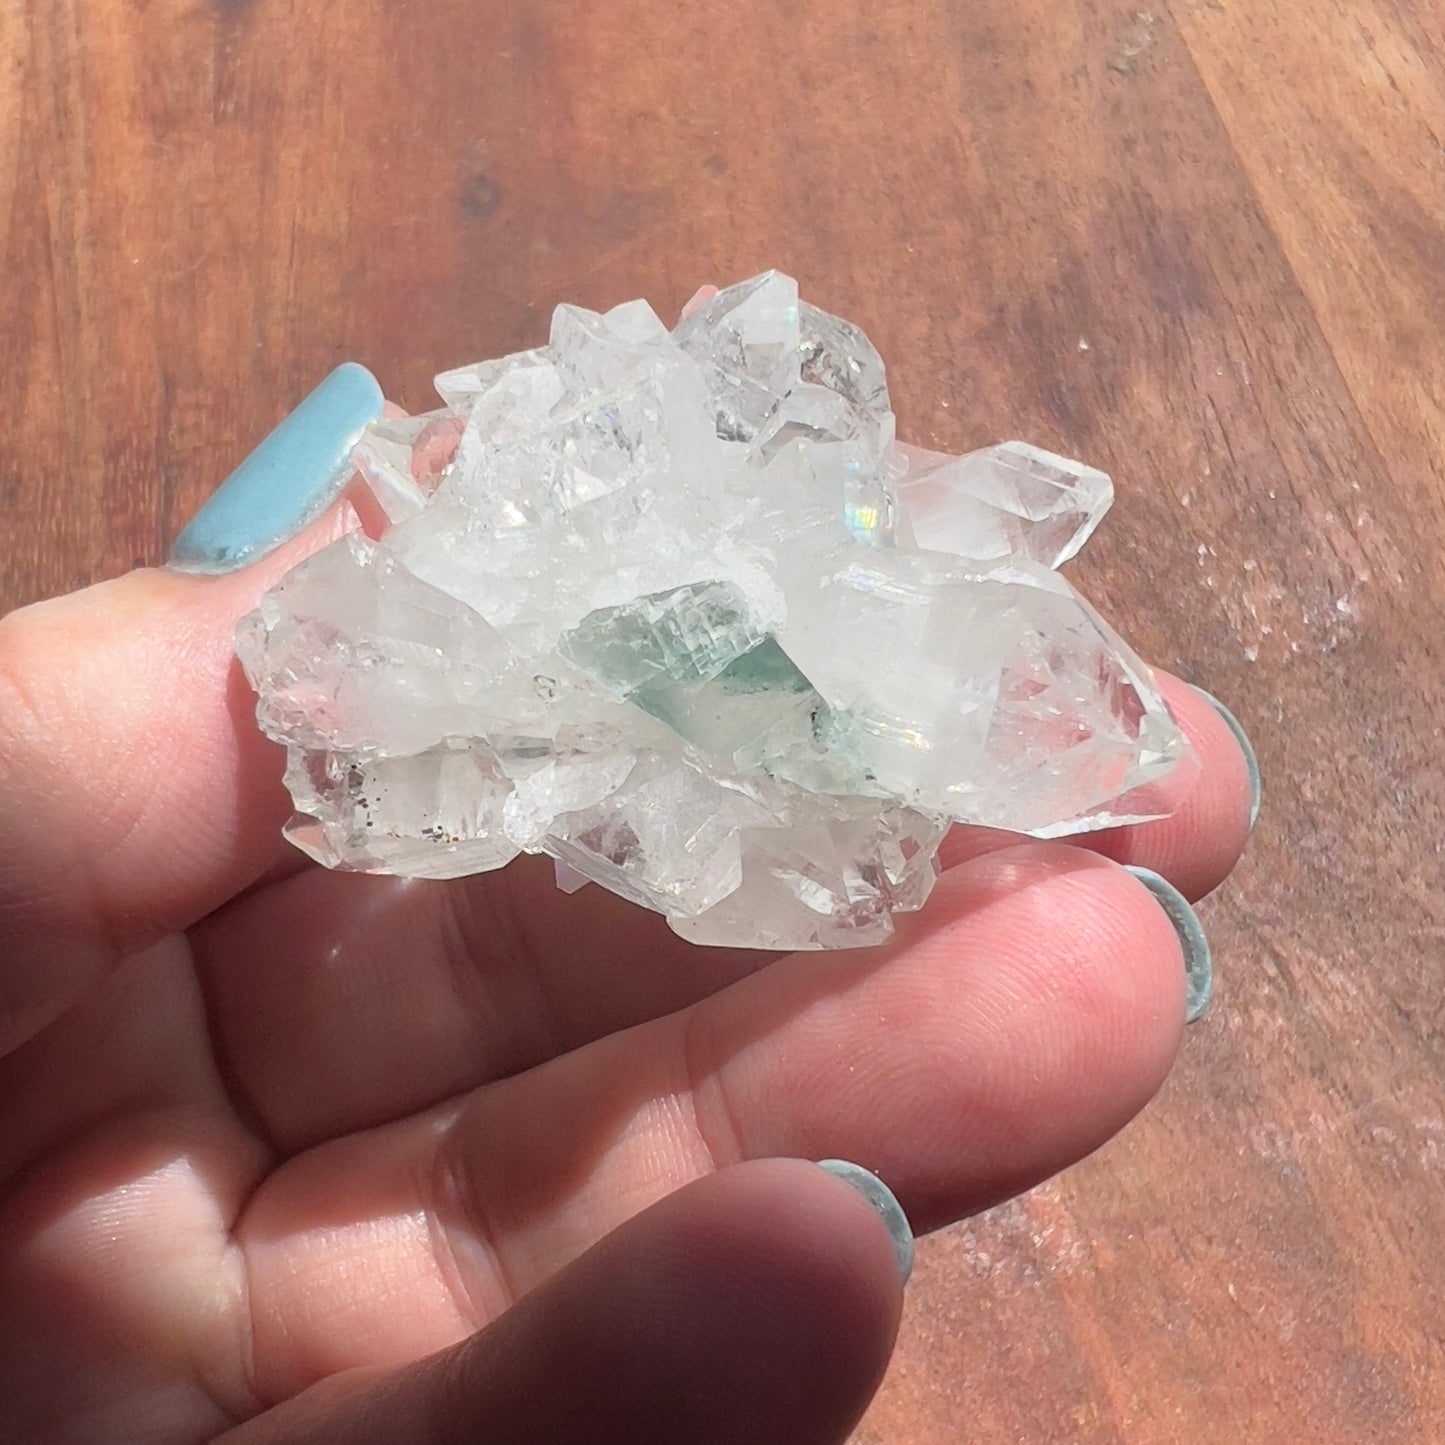 Mirror Apophyllite Cluster on Clear Calcite with Chlorite inc matrix